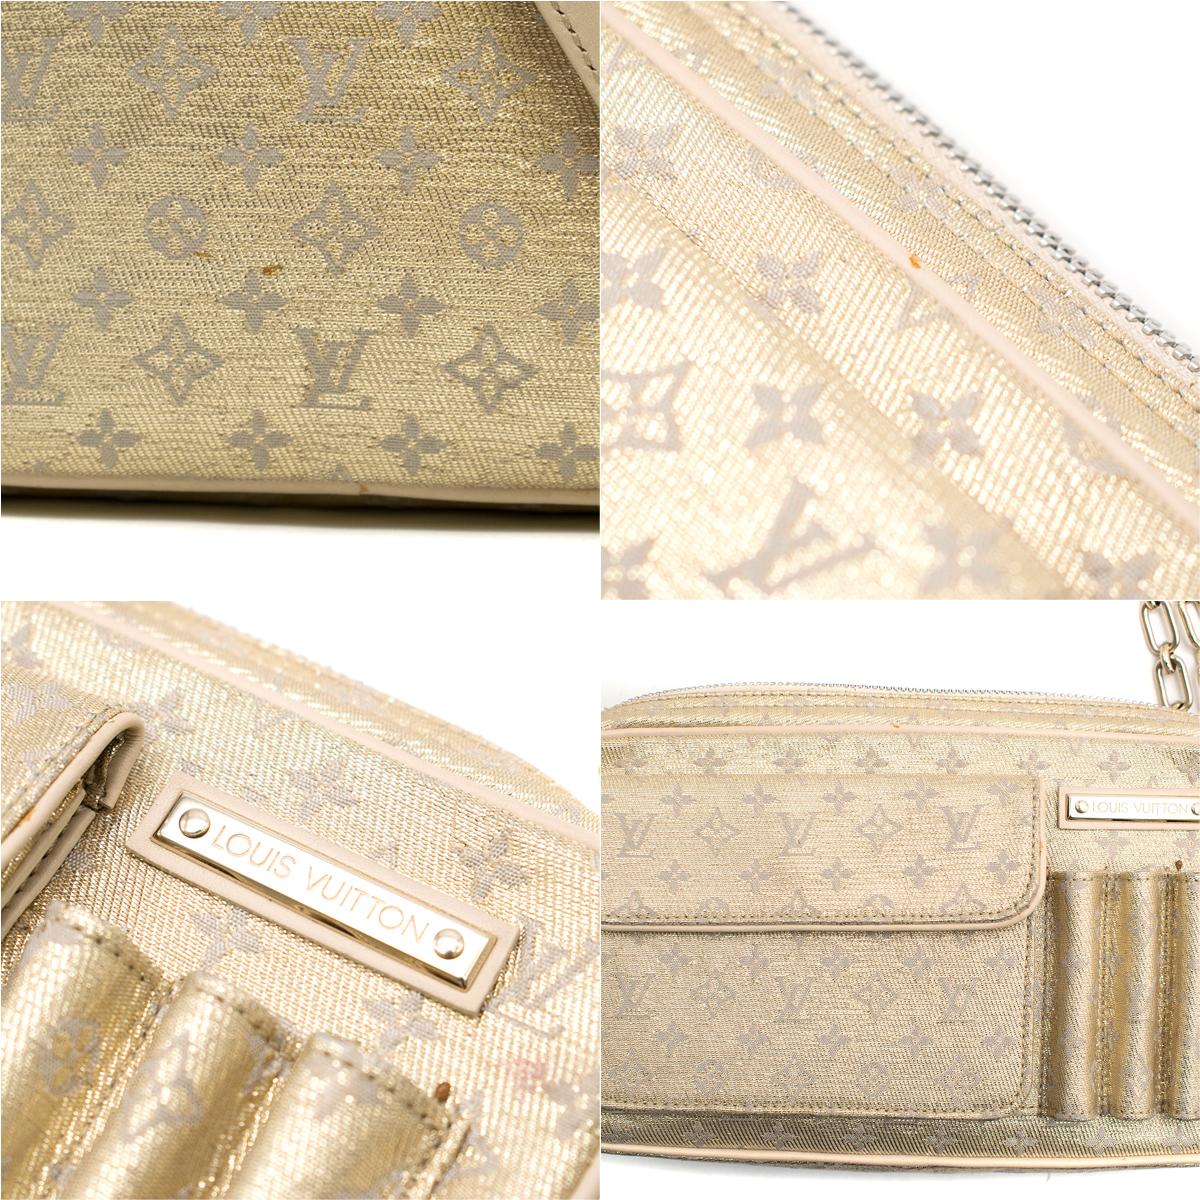 Louis Vuitton Small Gold Limited Edition Monogram Bag 4